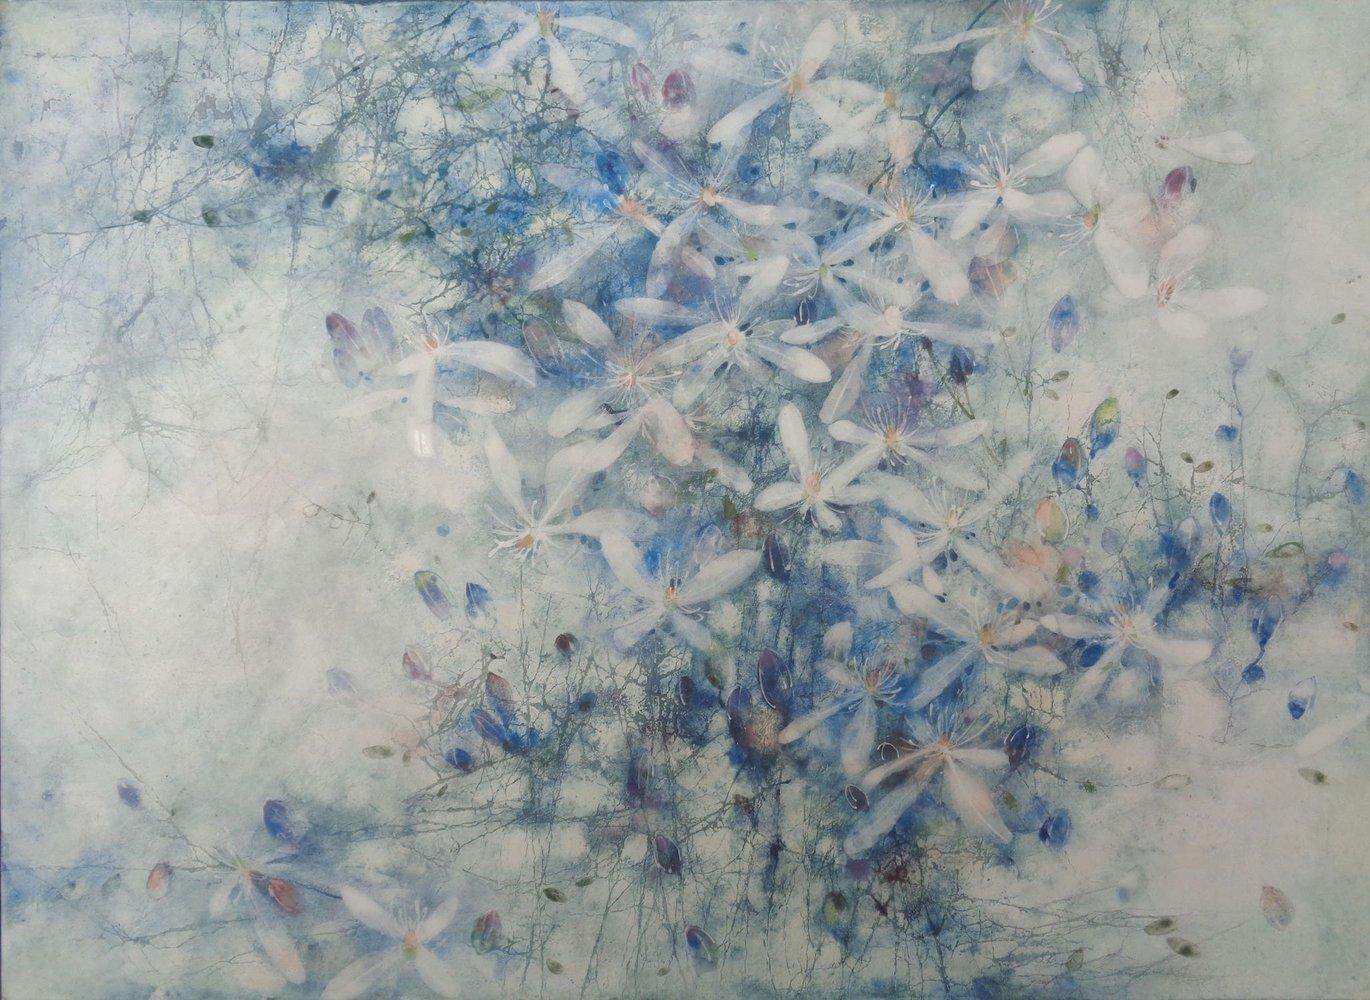 Bond by CHEN Yiching - Contemporary Nihonga painting, flora, blue - Mixed Media Art by Yiching Chen